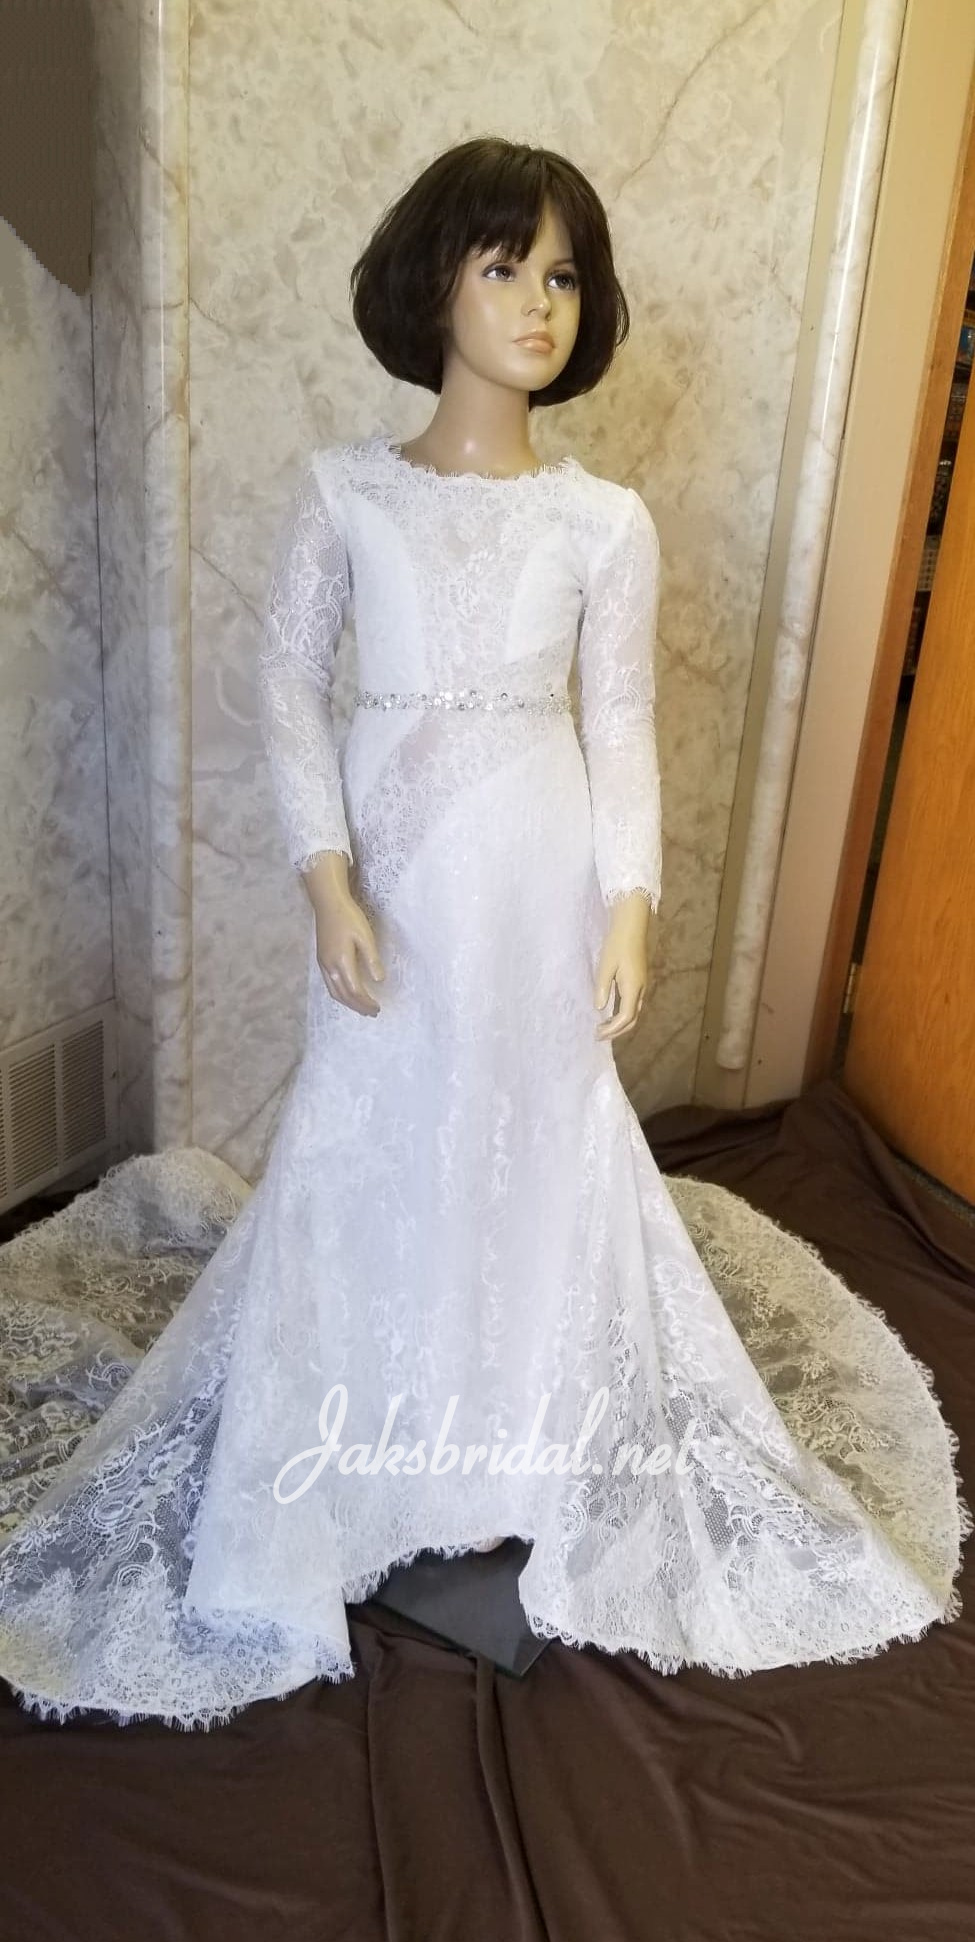 Long sleeve flower girl dress in beautiful lace, sprinkled with sequins. 